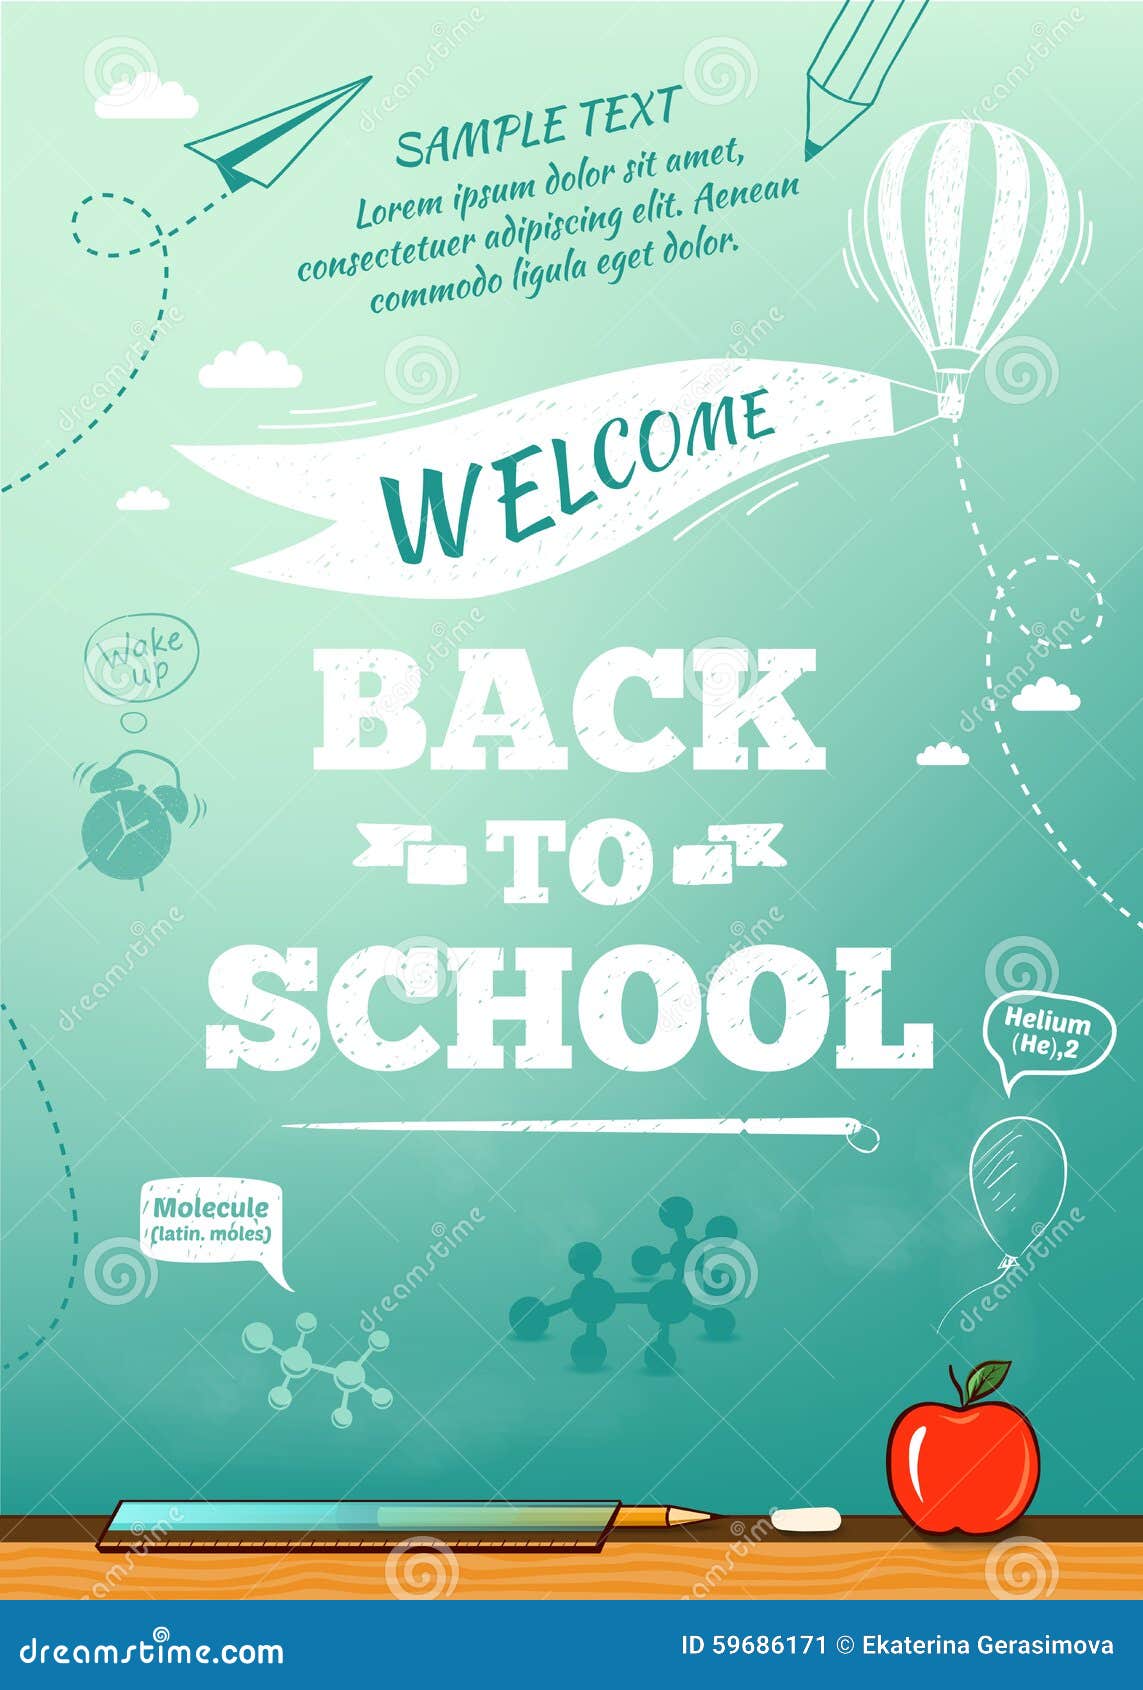 Back To School Poster, Education Background Stock Vector - Illustration